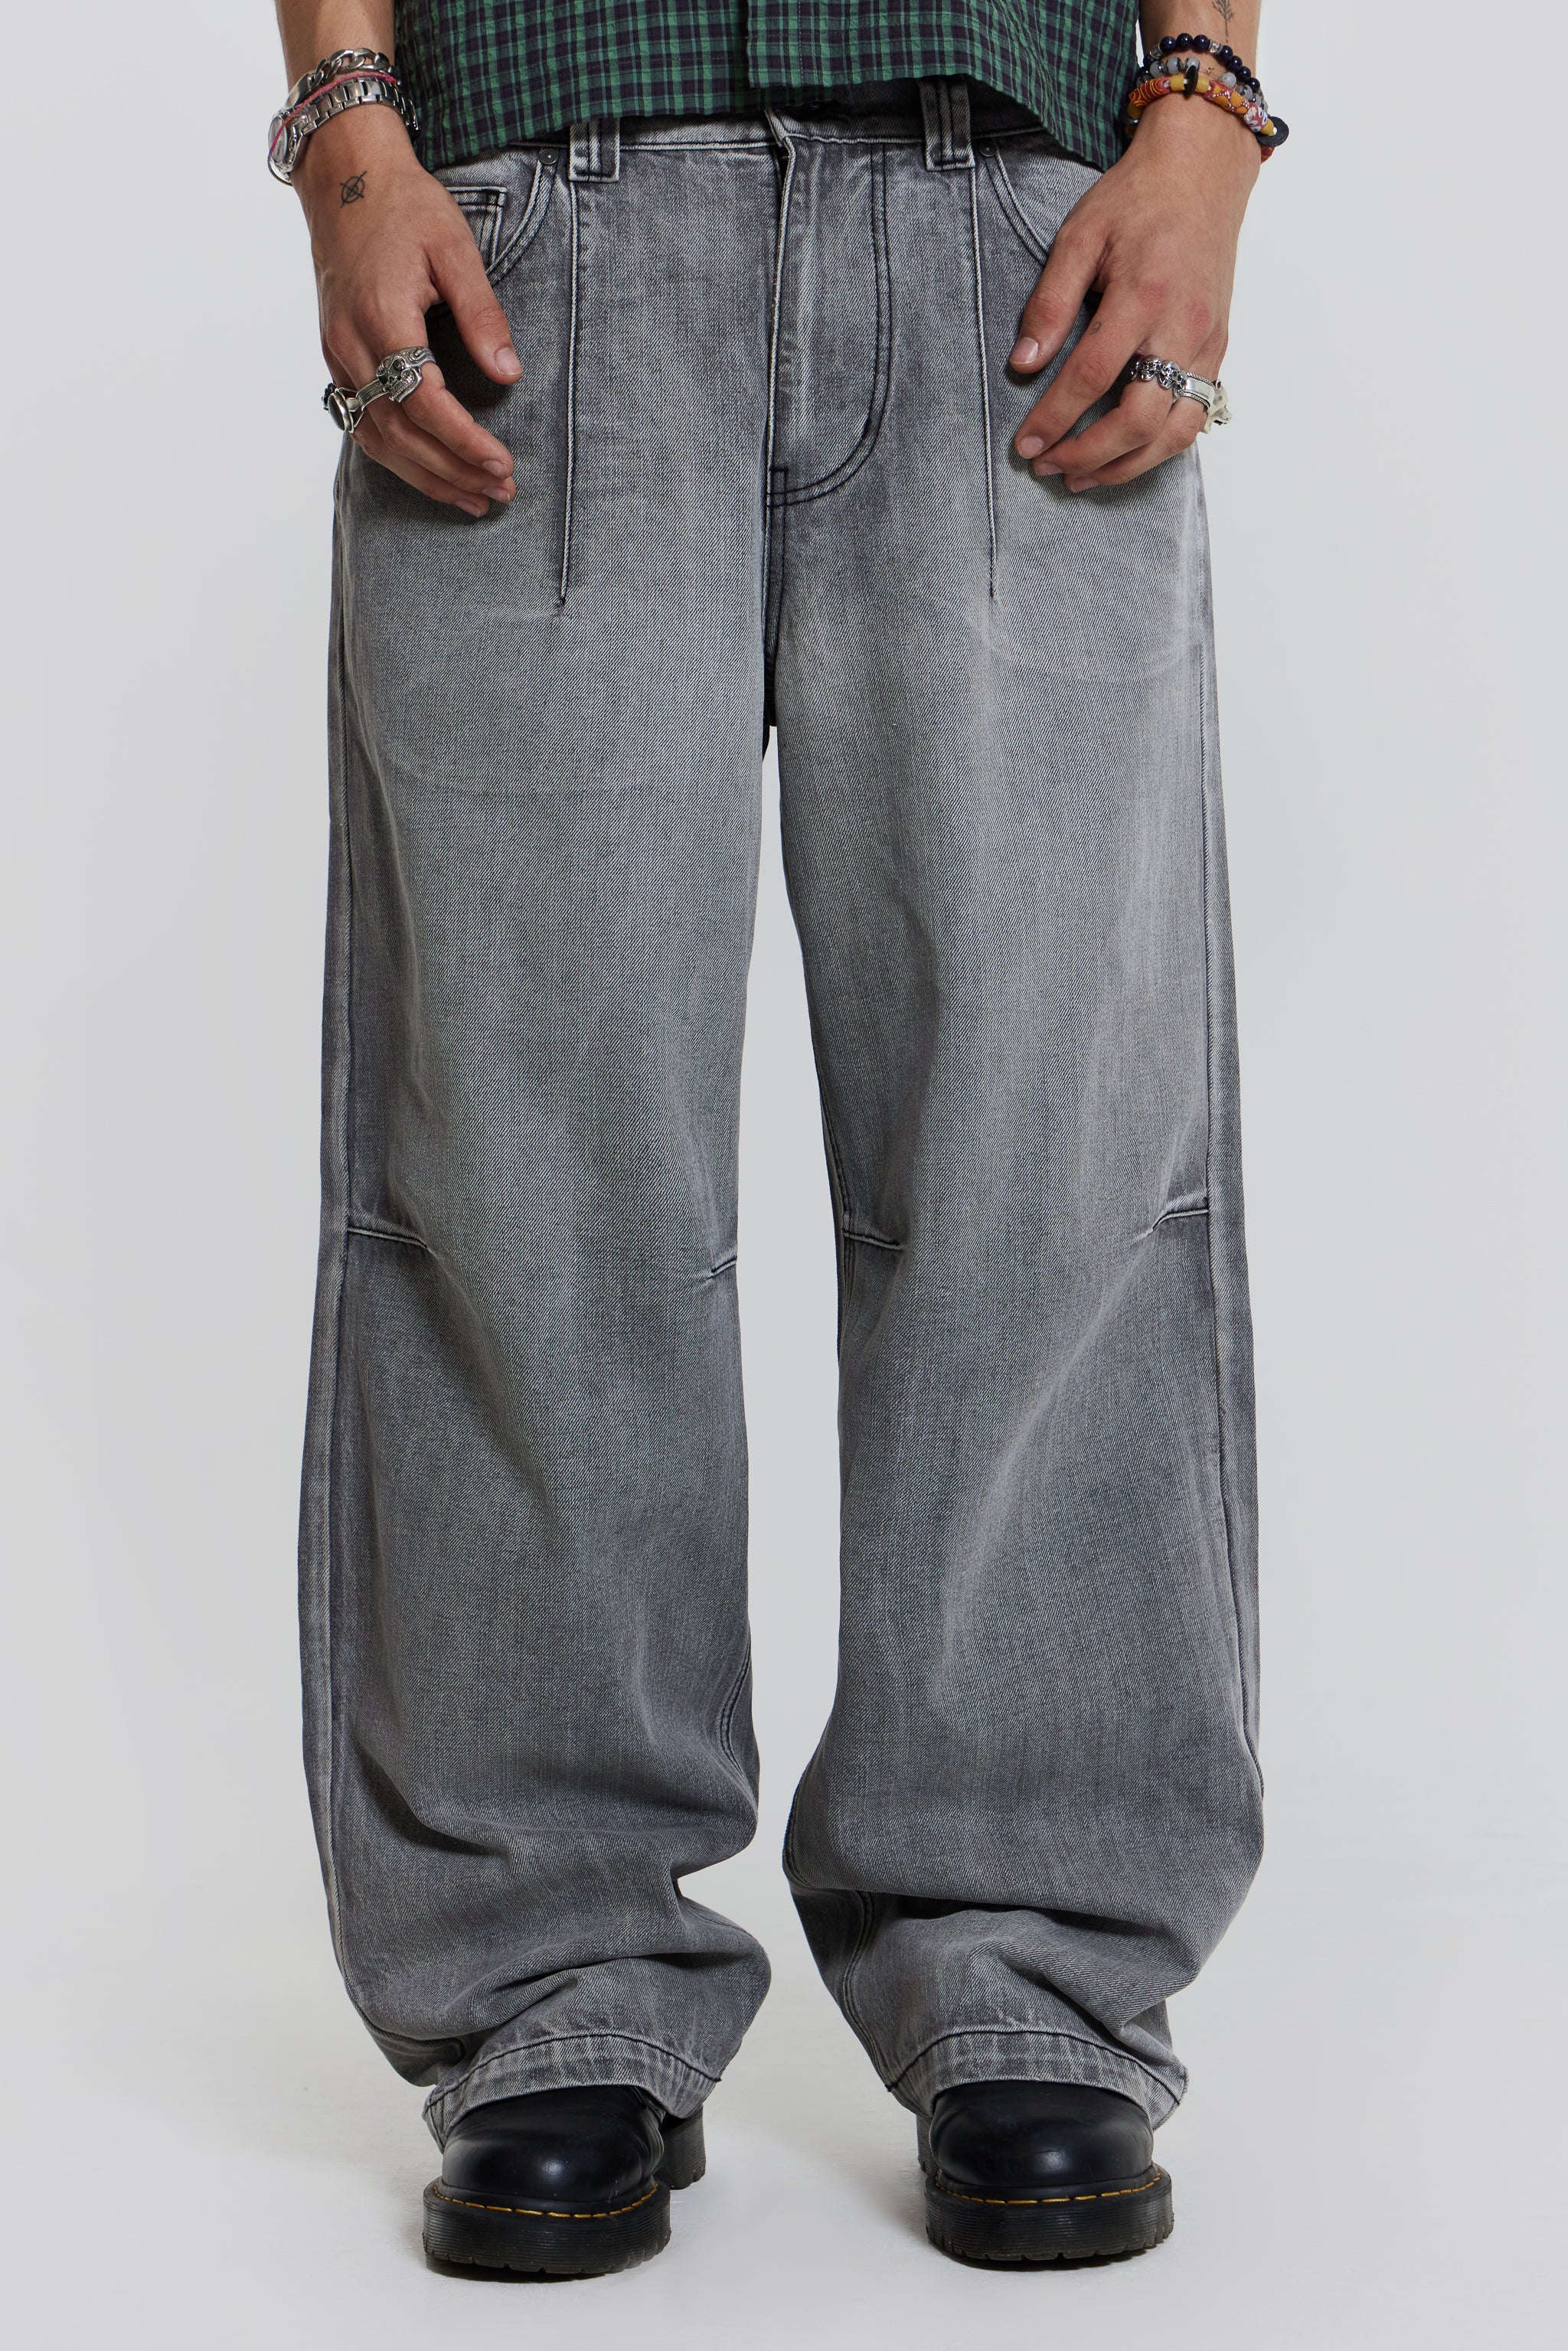 Darted Grey Jeans